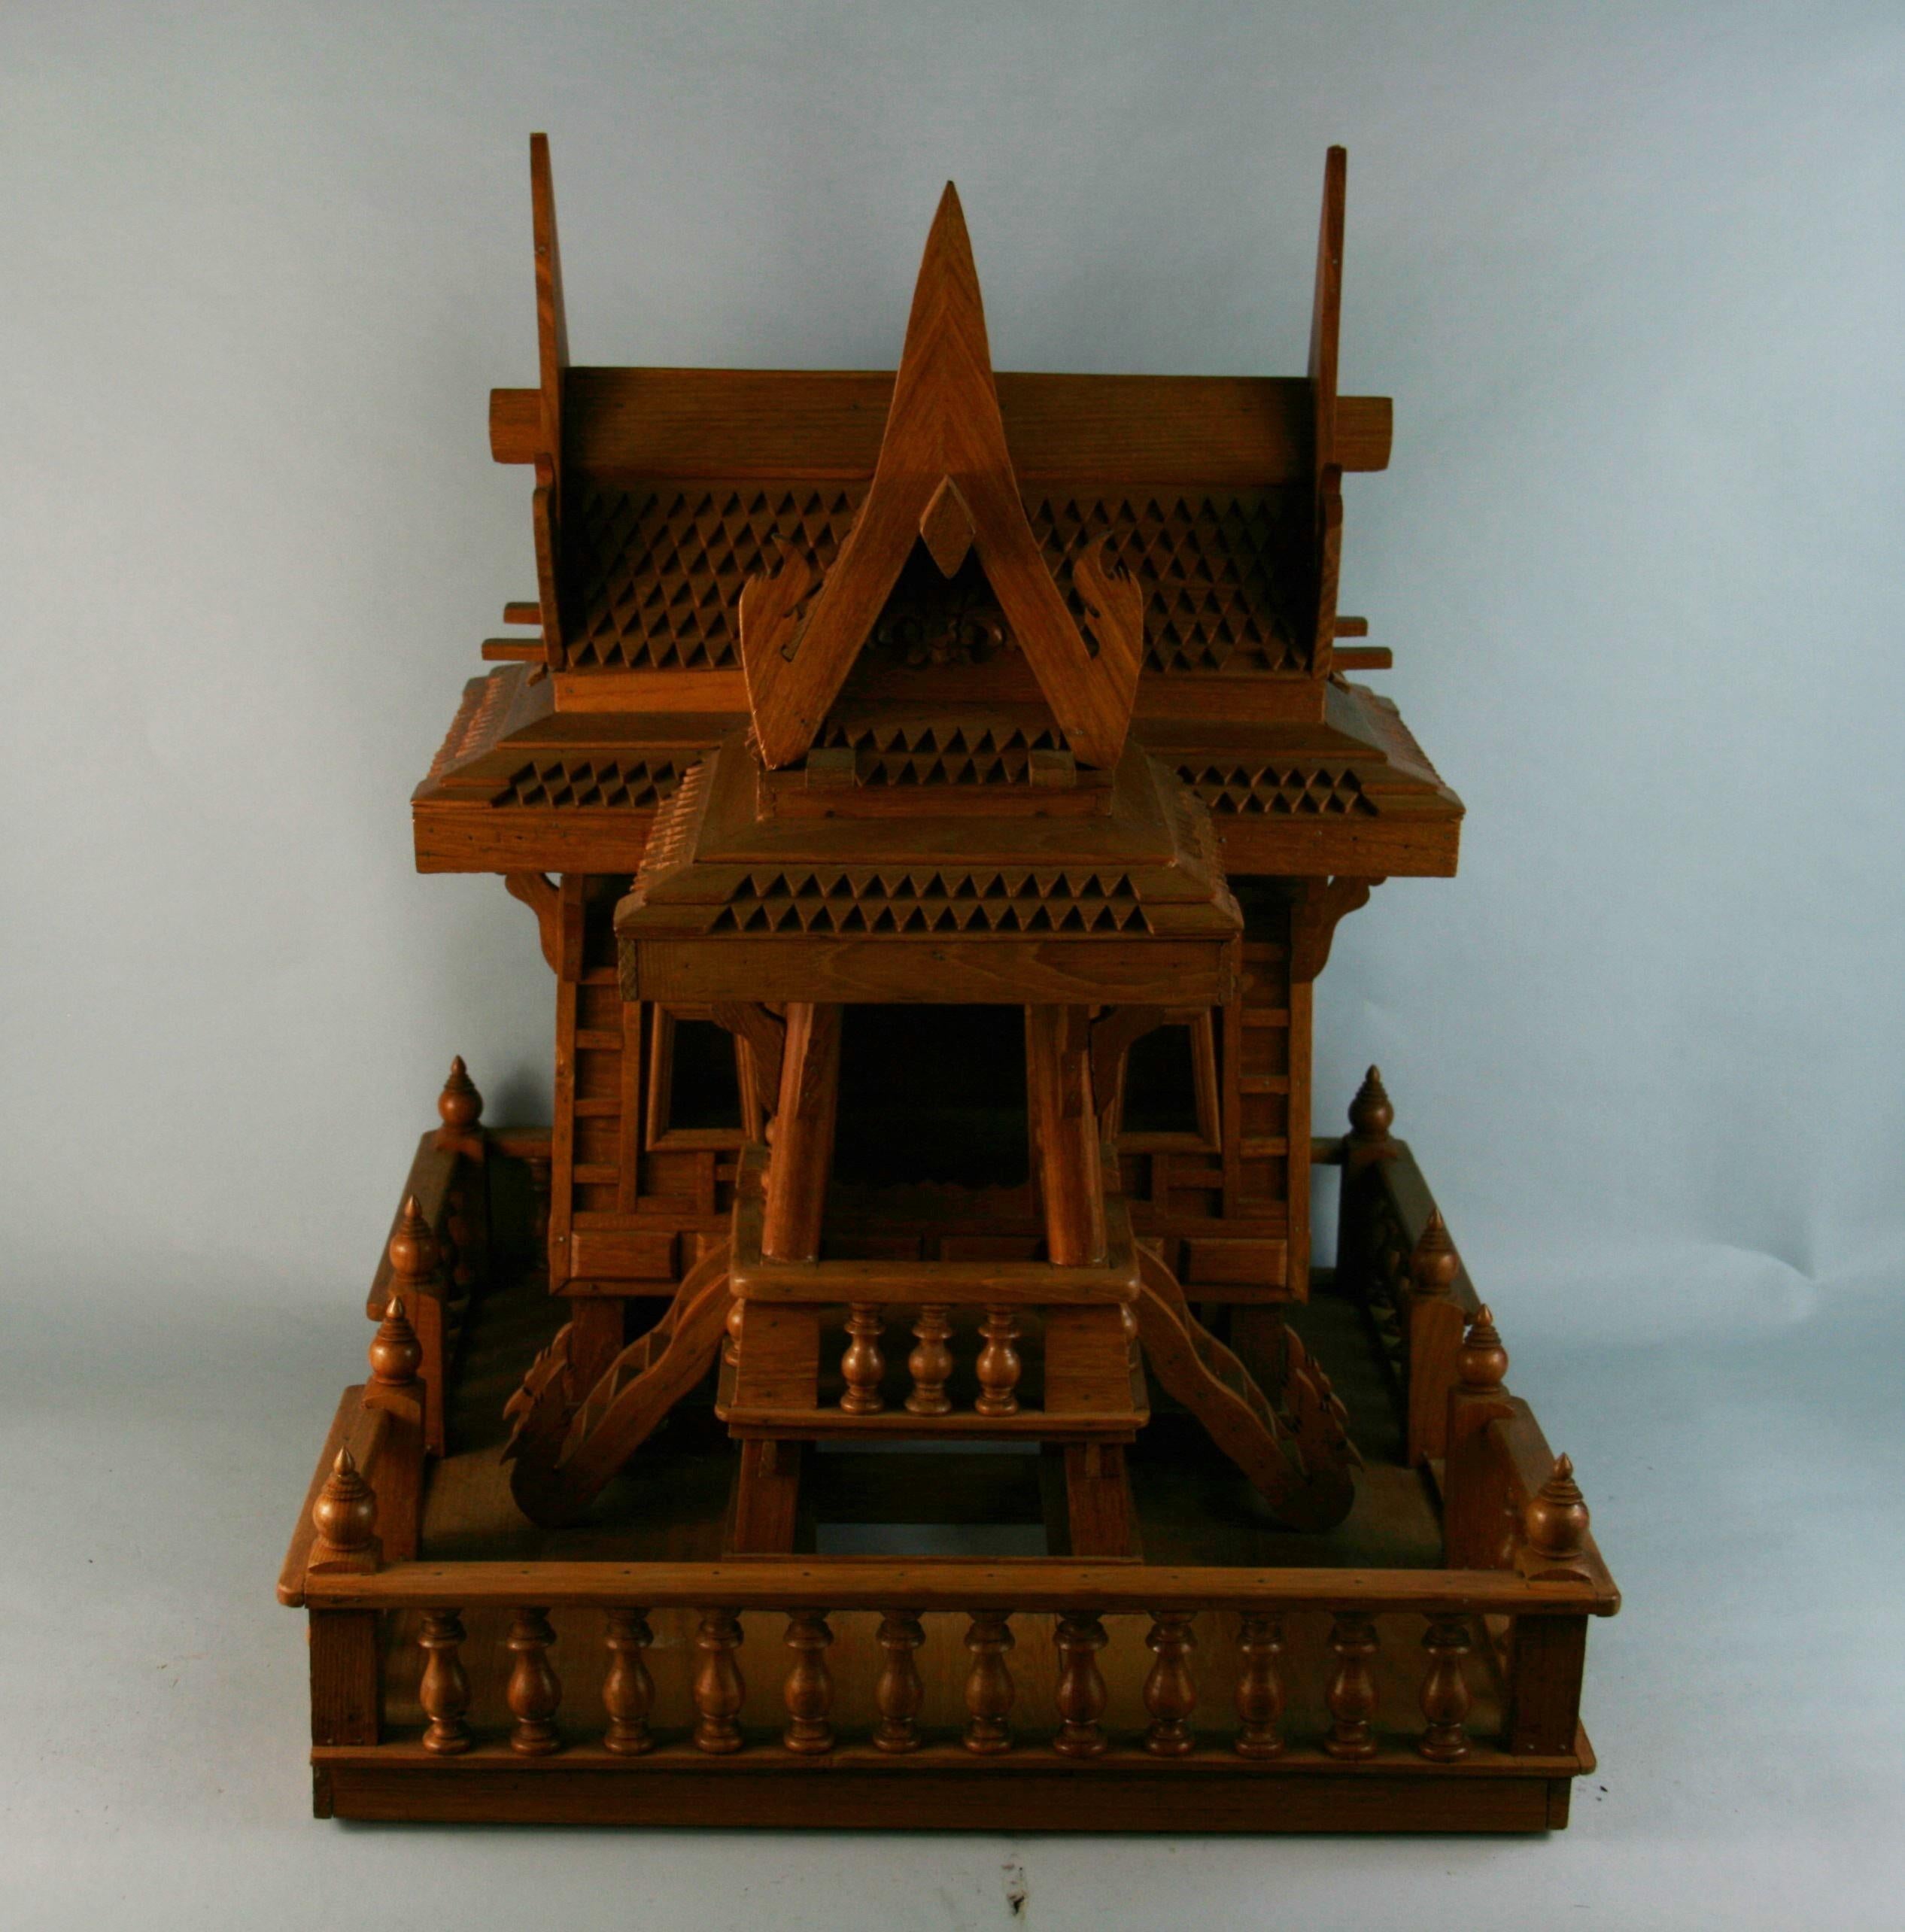 3-800 hand made in teak wood architectural model of a northern Thailand house.